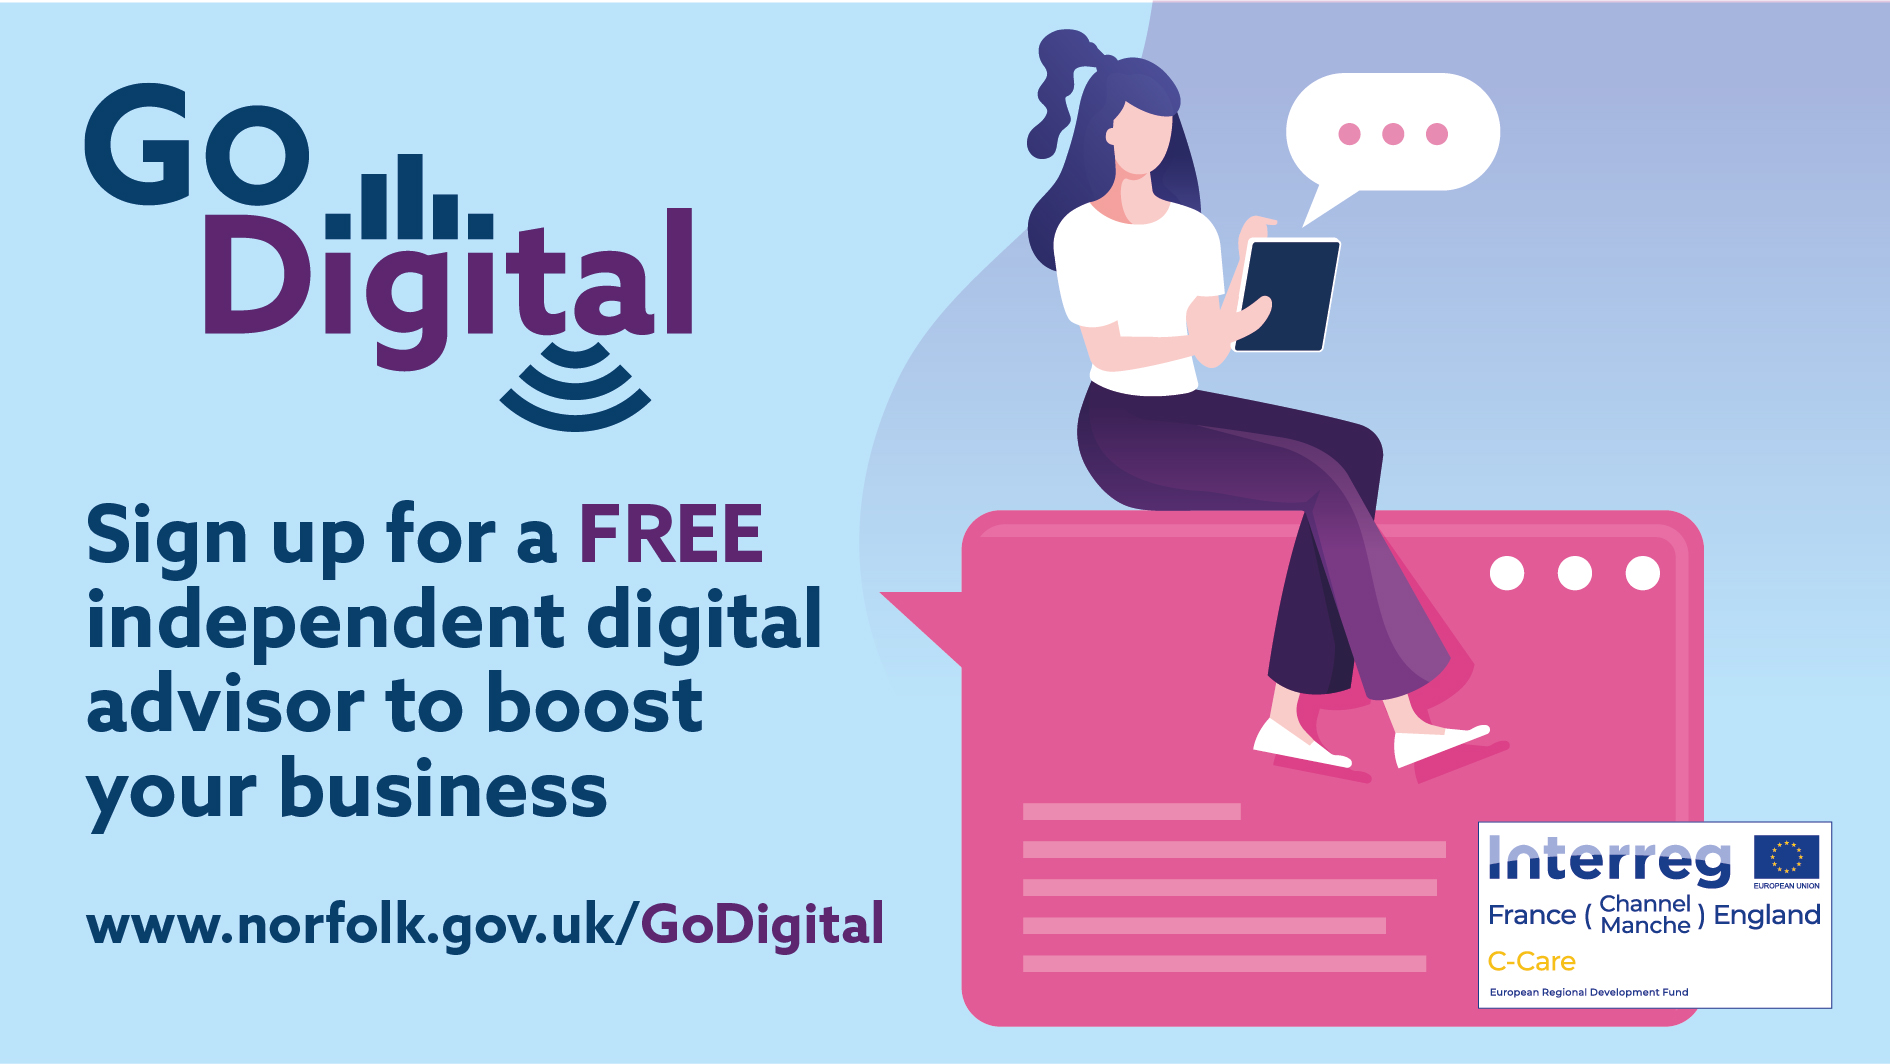 Sign up for a free independent digital advisor with Go Digital